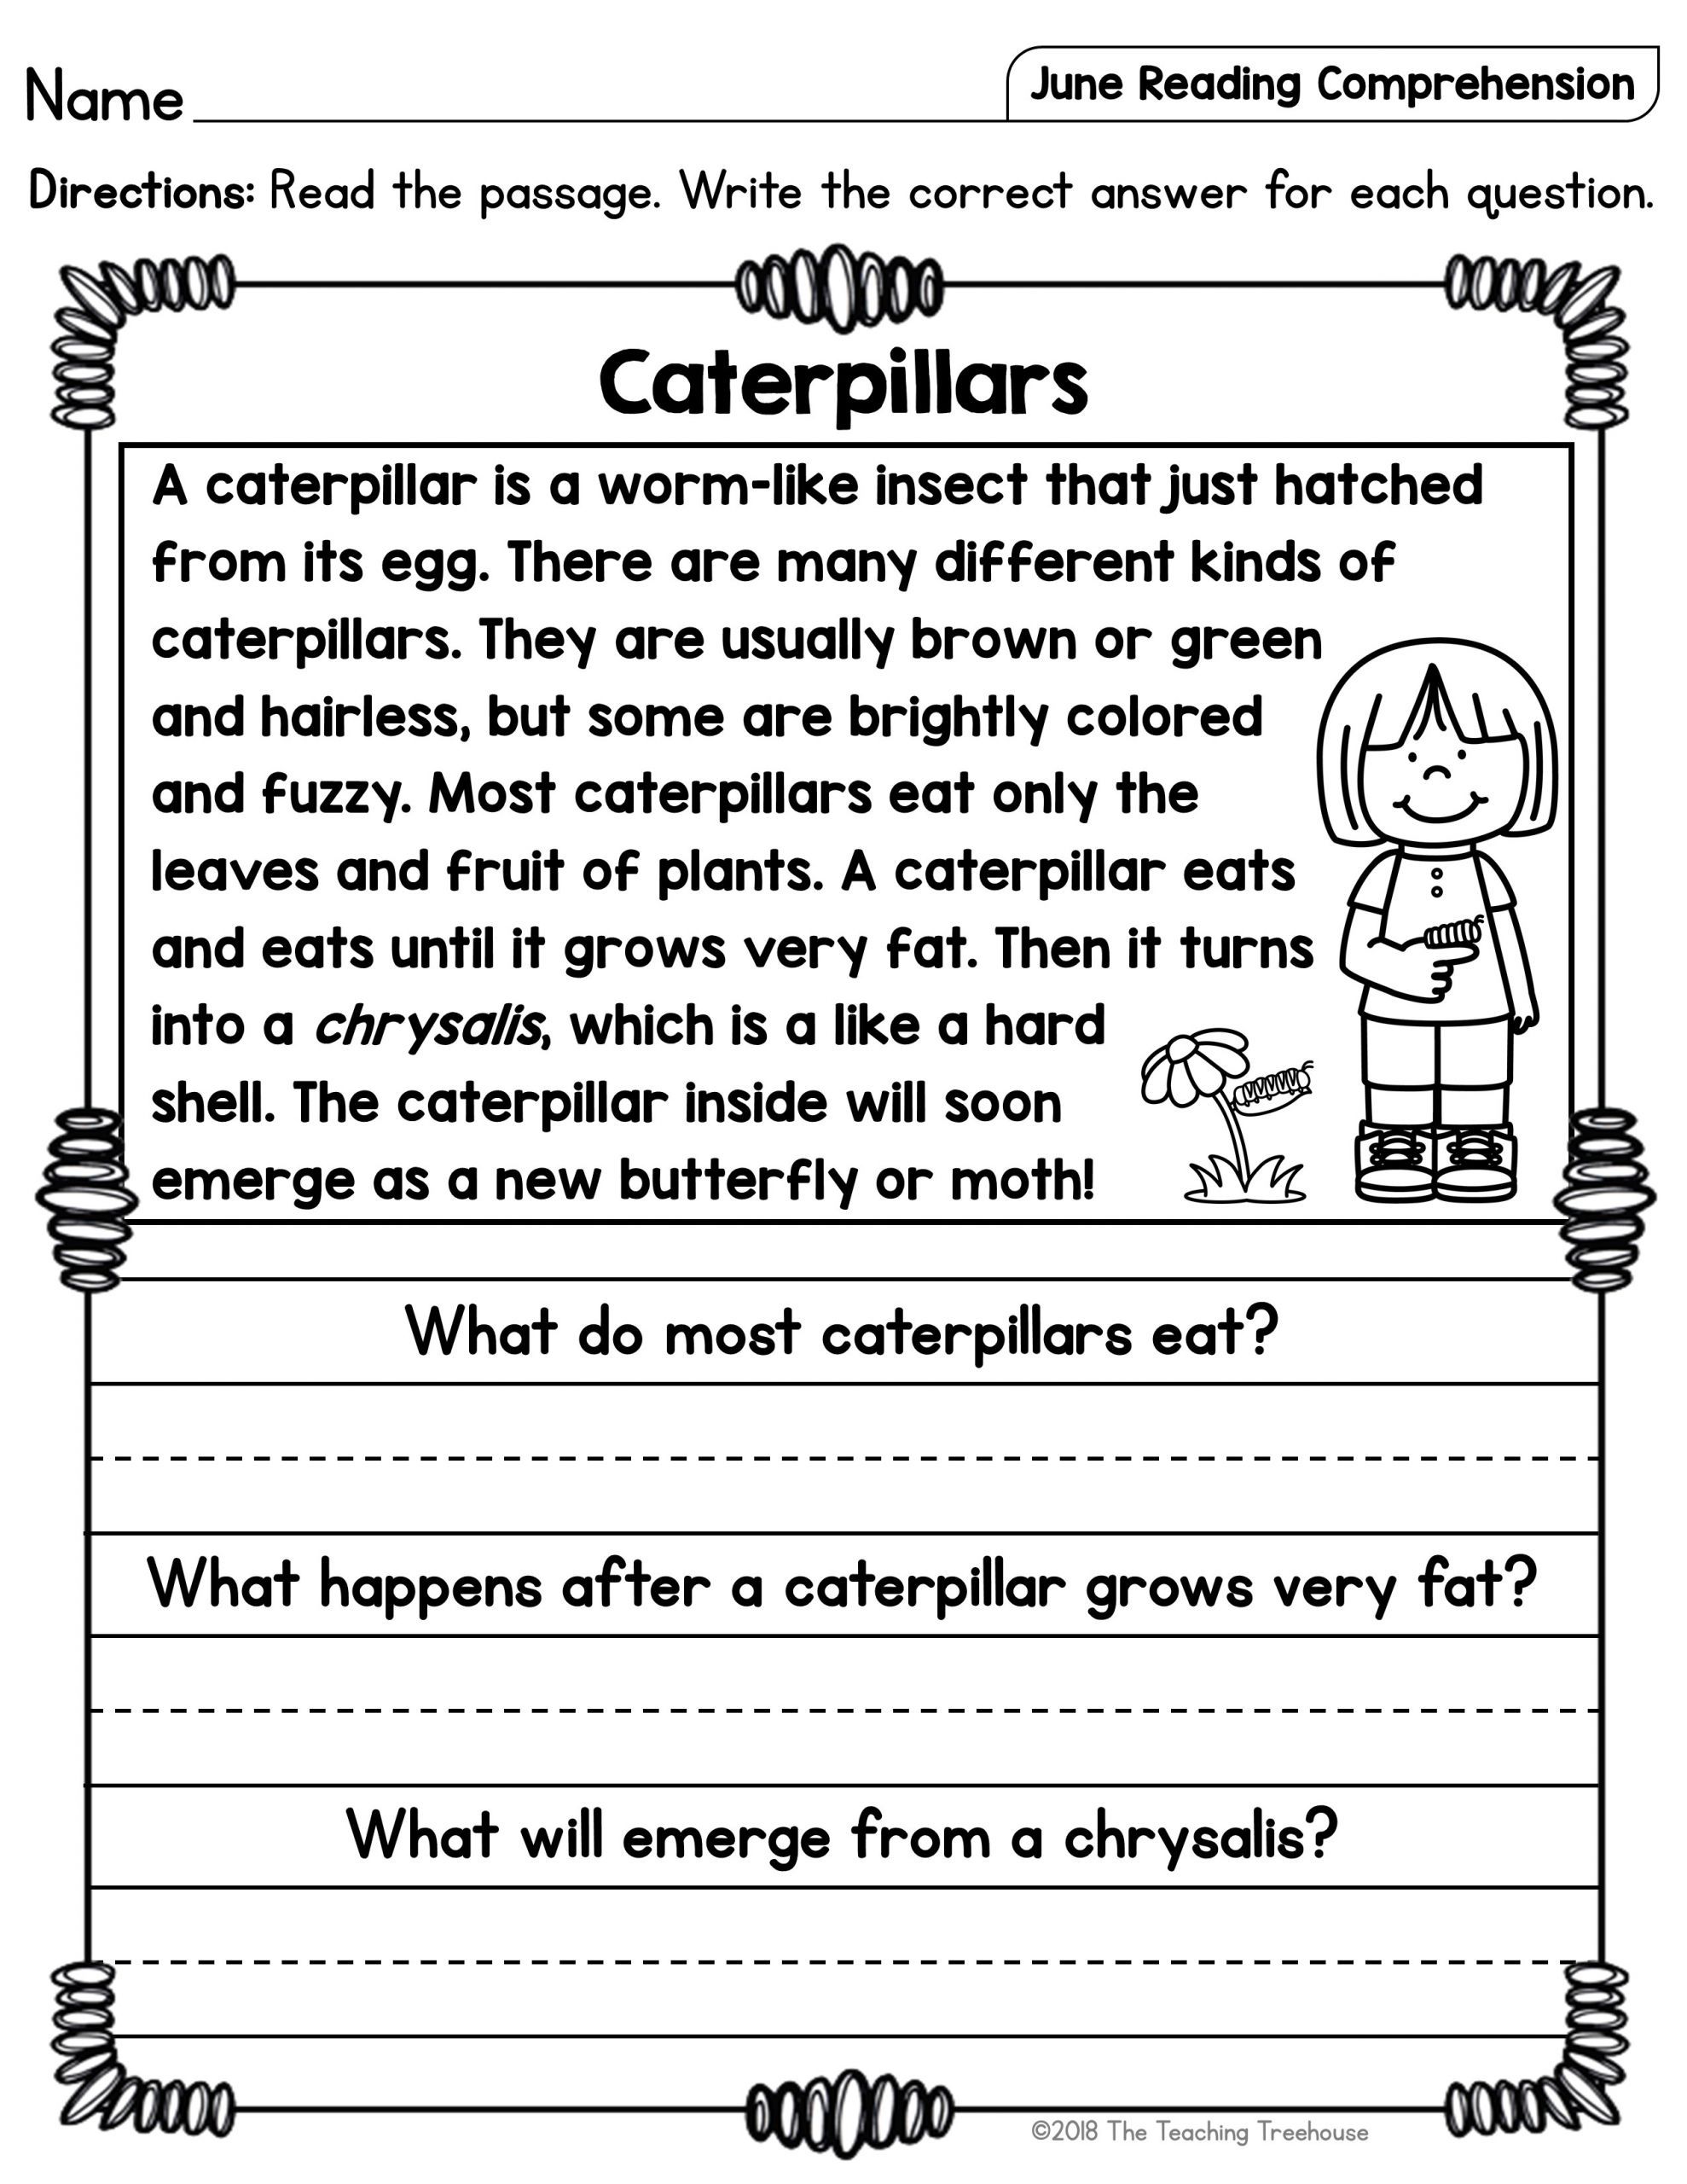 Reading Comprehension Year 4